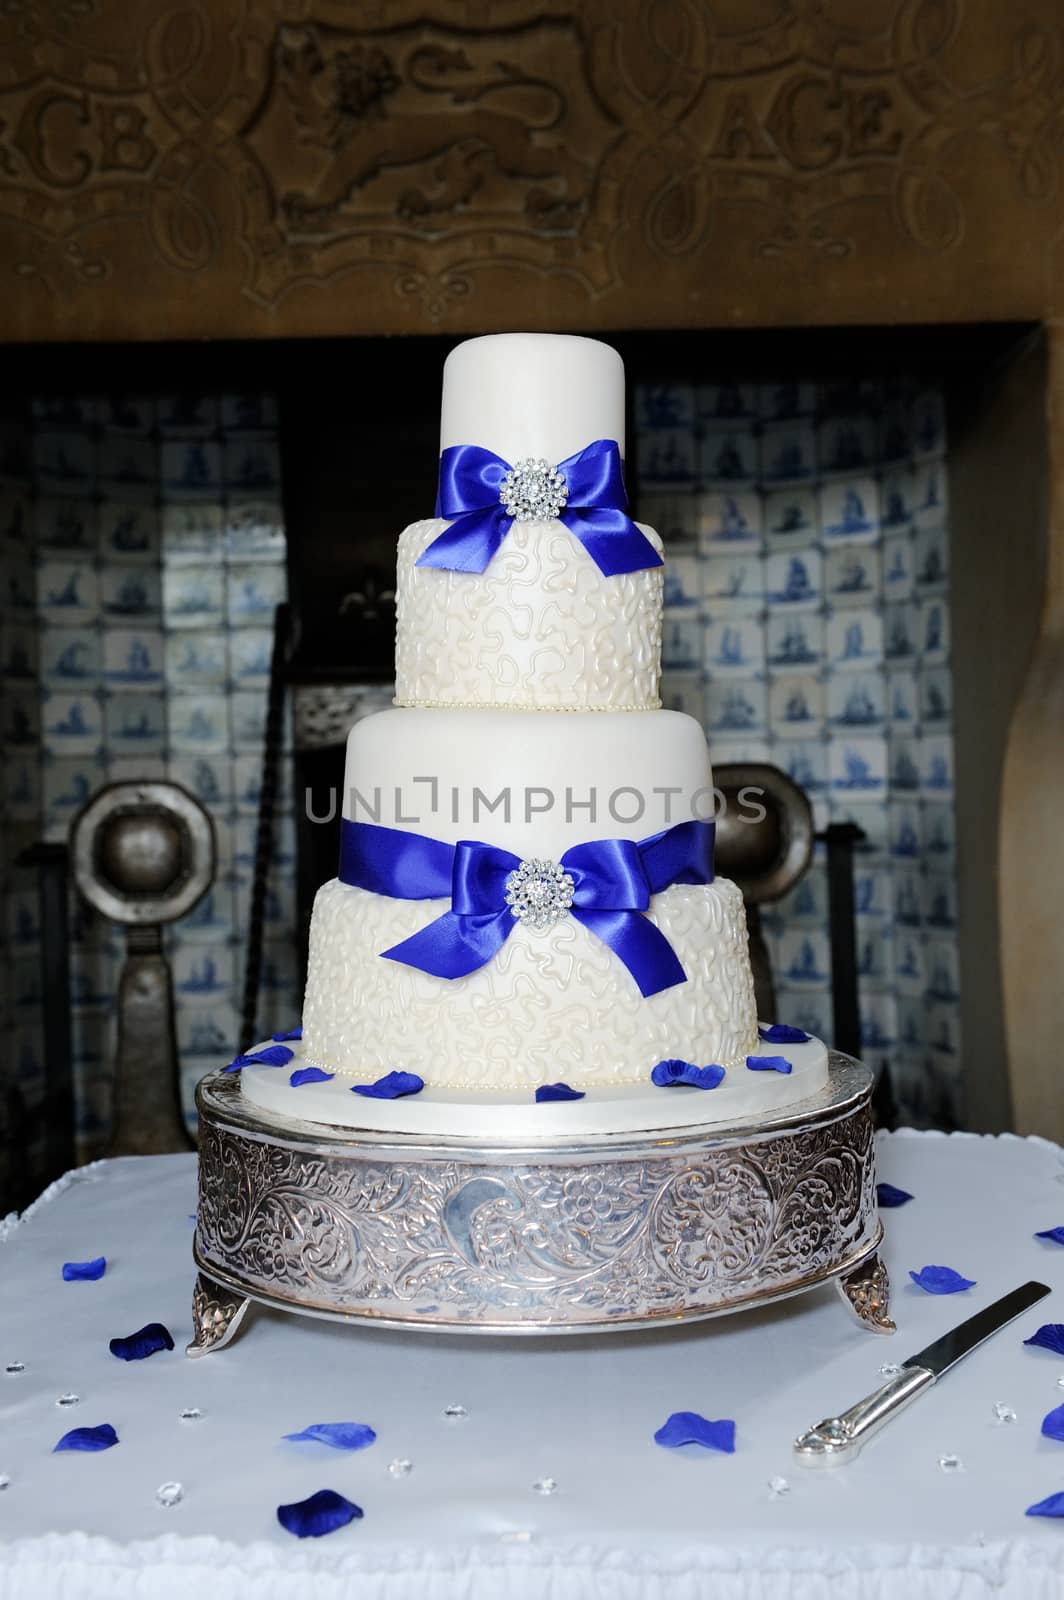 Blue and white wedding cake by kmwphotography